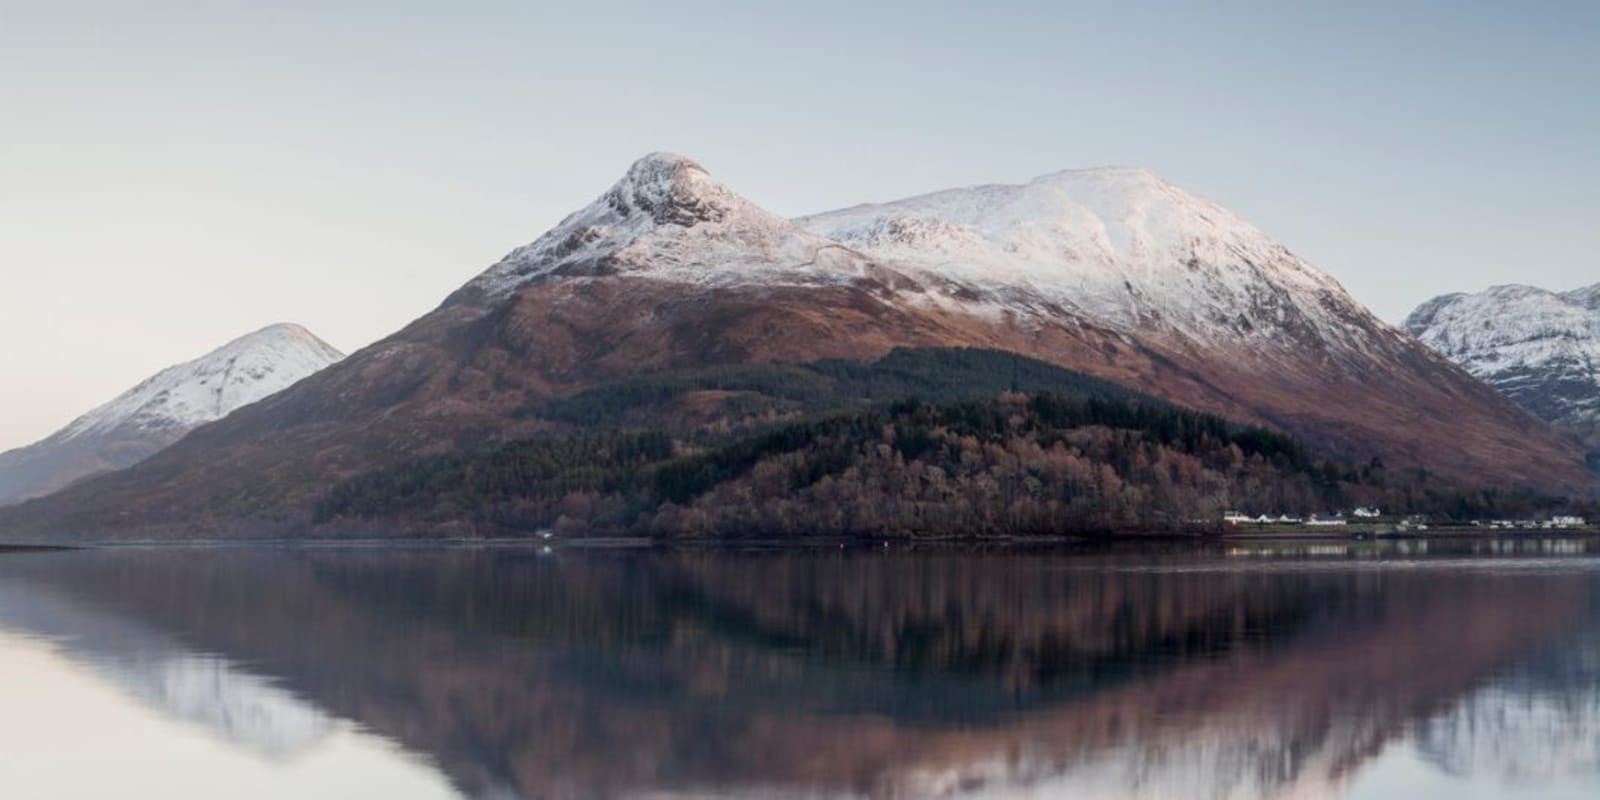 The Pap of Glencoe reflecting in Loch Leven